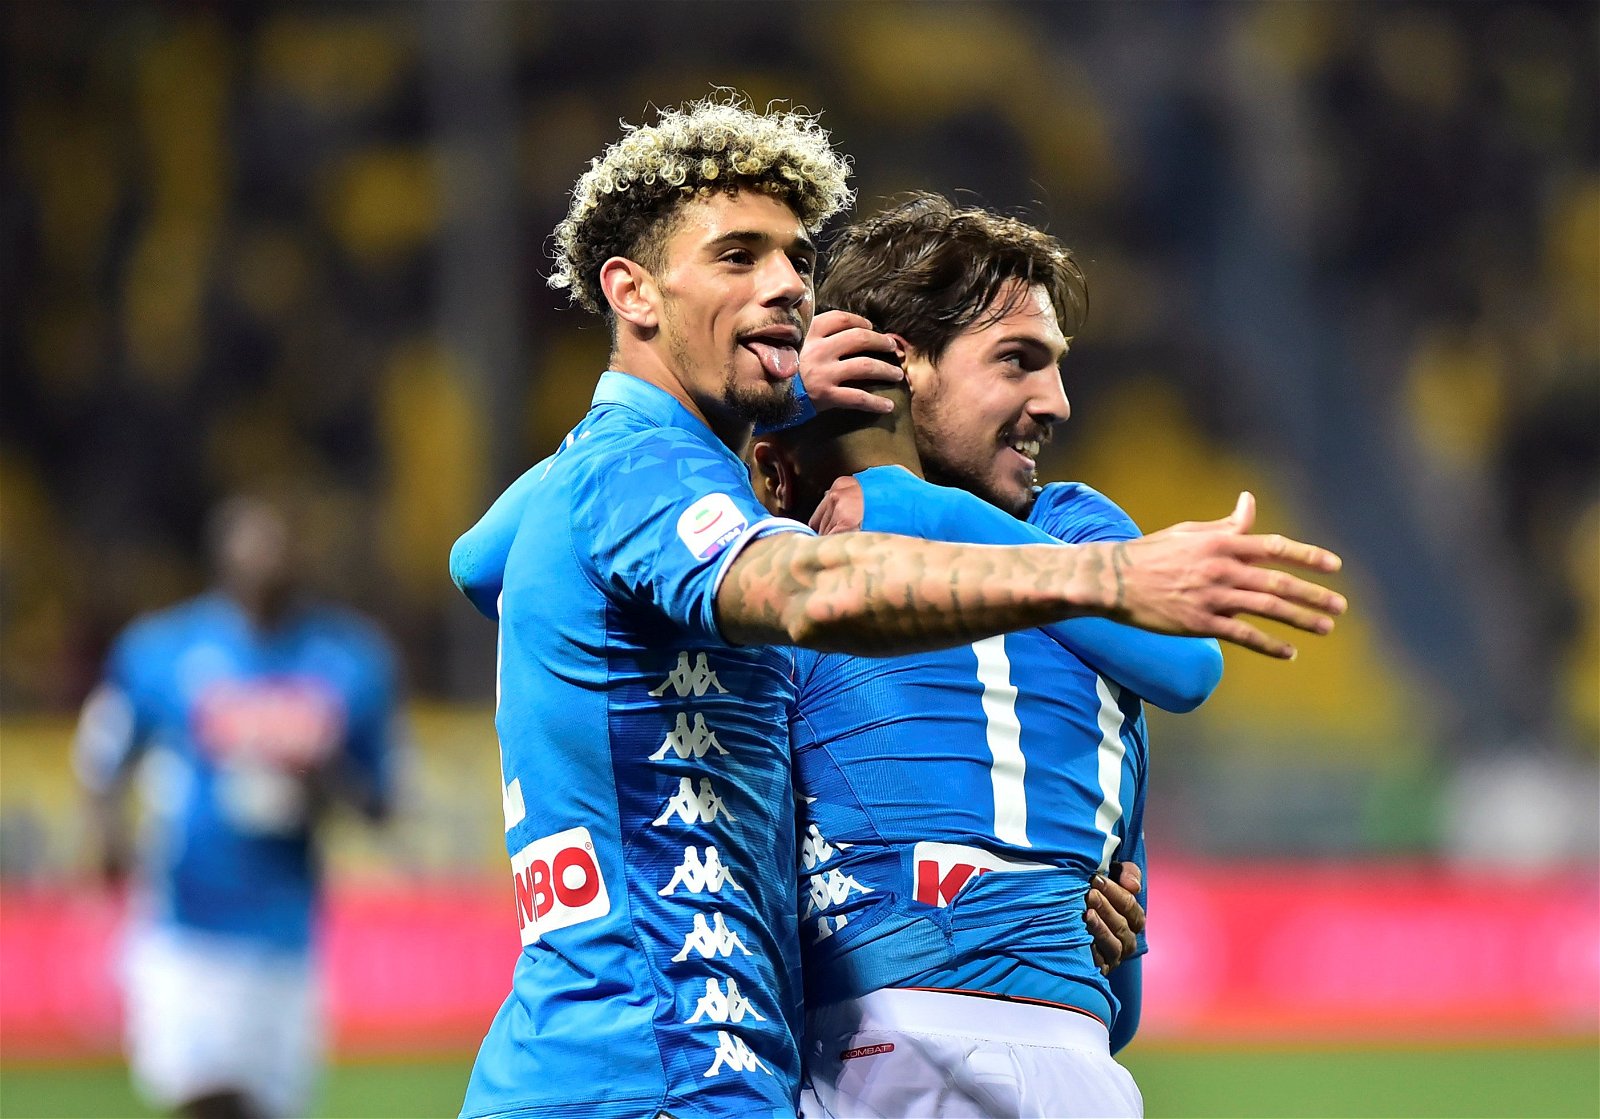 Season over for Napoli defender Kevin Malcuit after ACL tear